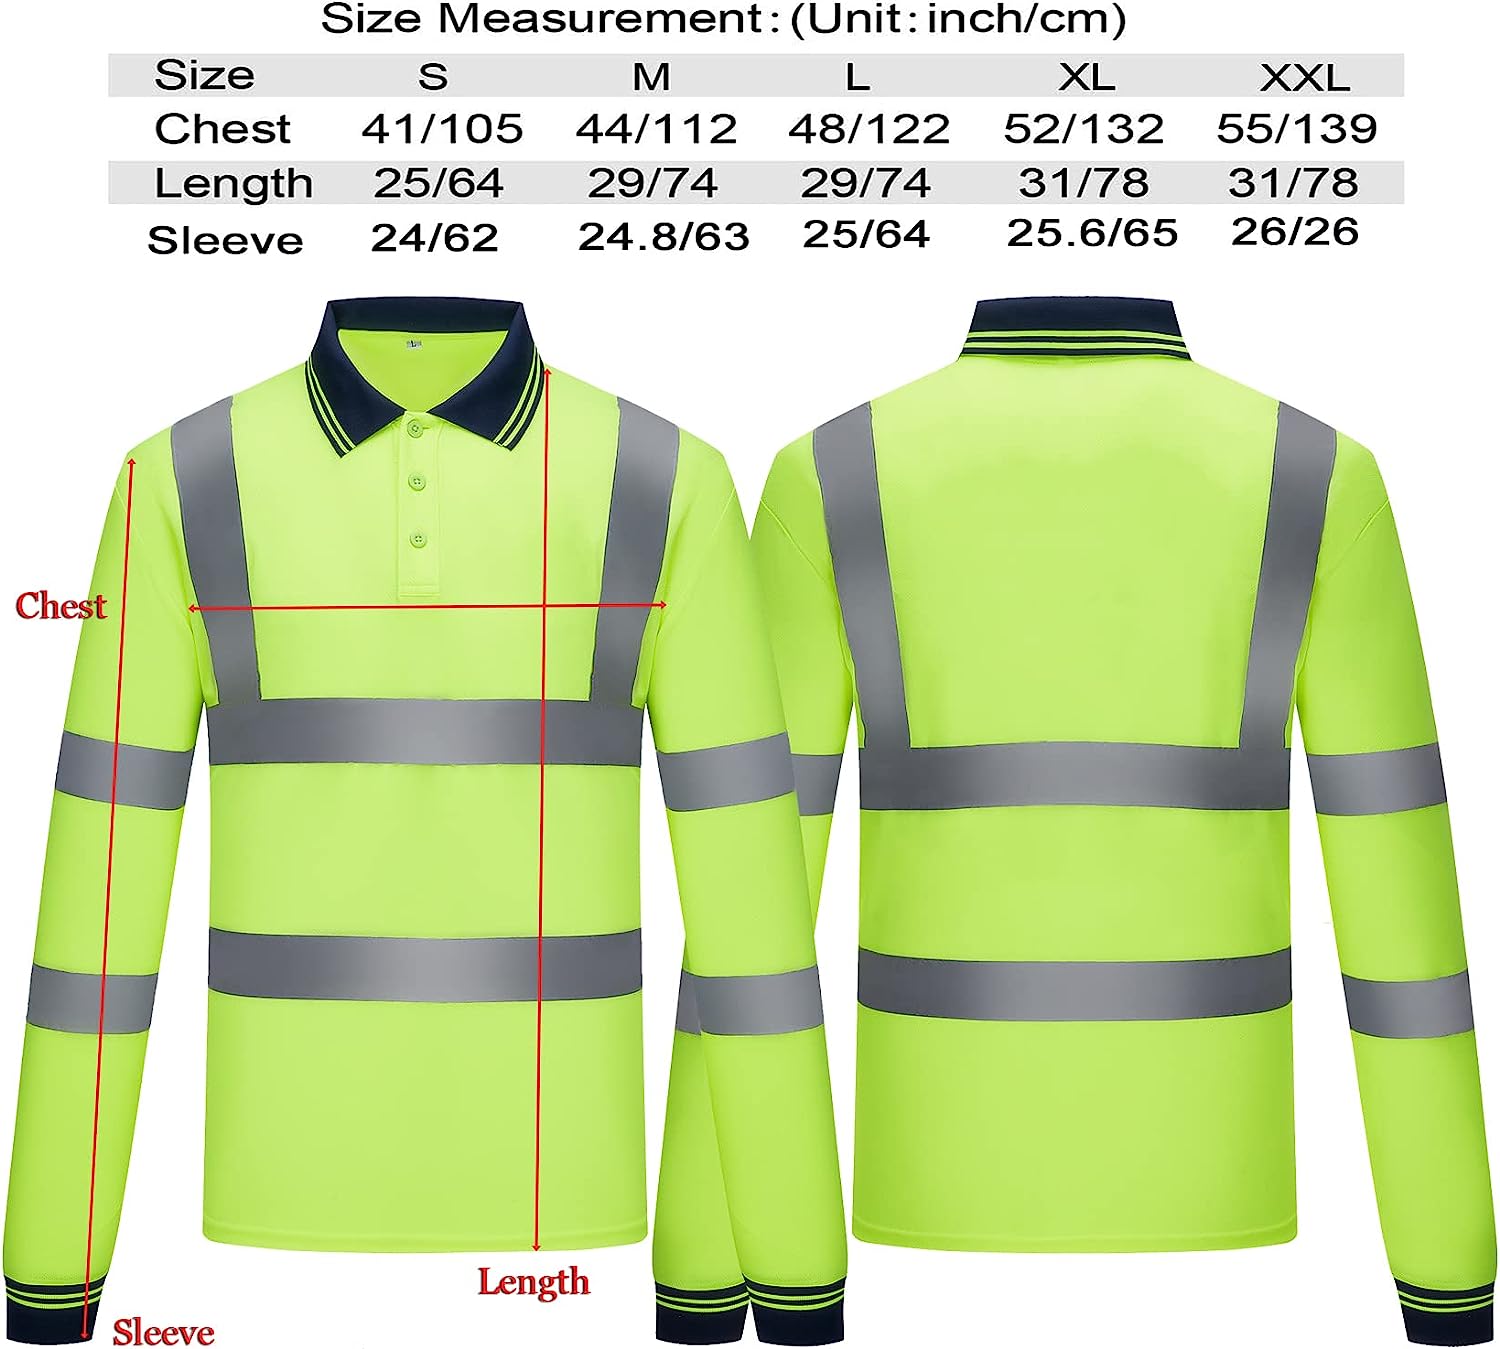 Custom Safety Shirts Breathable Safety Shirt High Visibility Class 2 Customized T Shirt Quick Dry Work Wear